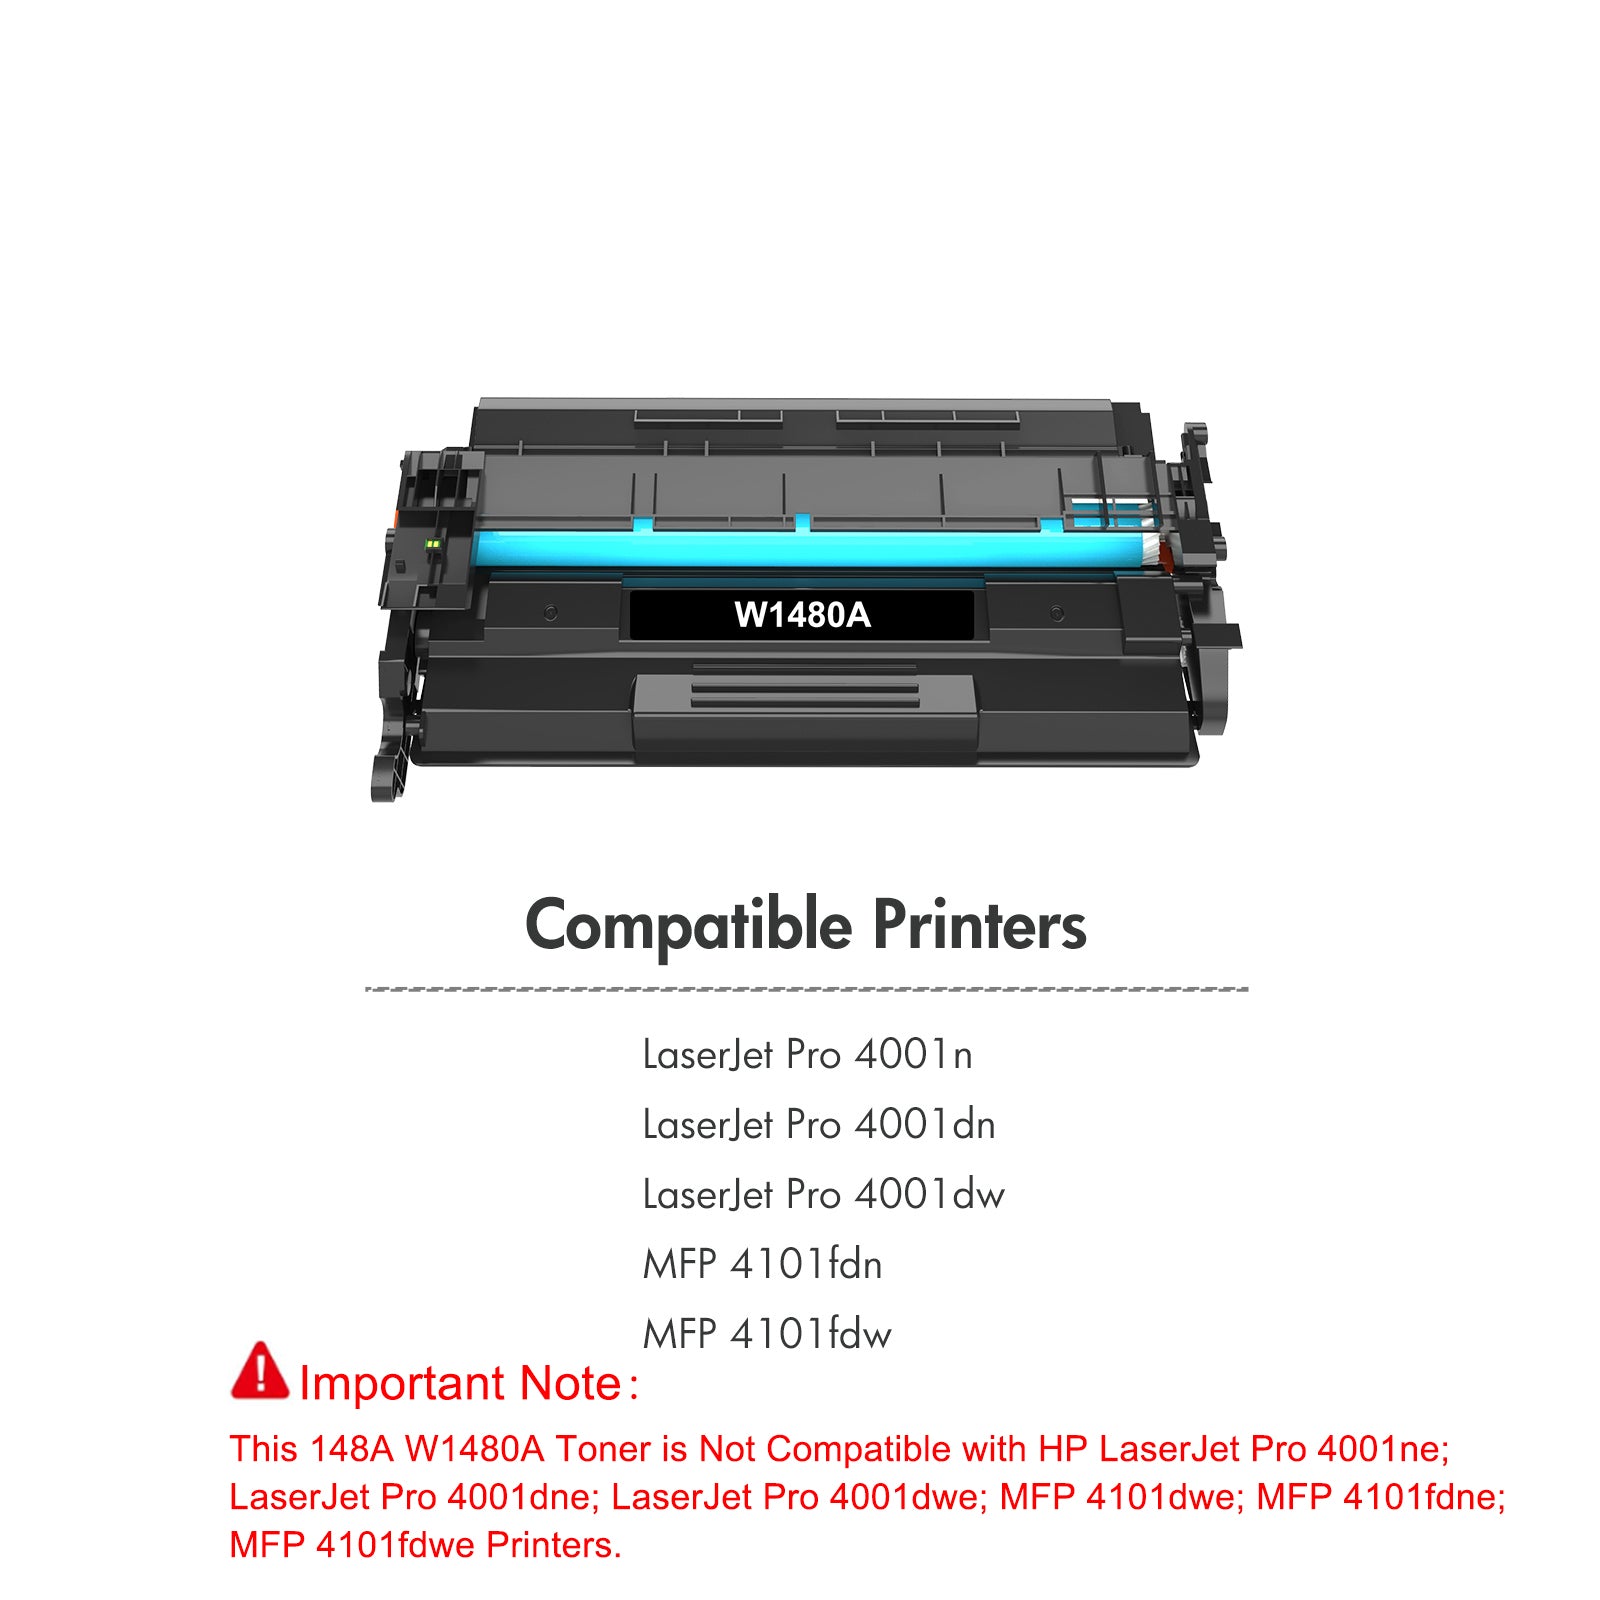 148A 148X Toner Cartridge Black with Chip Compatible for HP 148A W1480A 148X W1480X Laserjet Pro 4001dn MFP 4101fdw 4101fdn 4001n 4001dn 4001dw 1 Pack